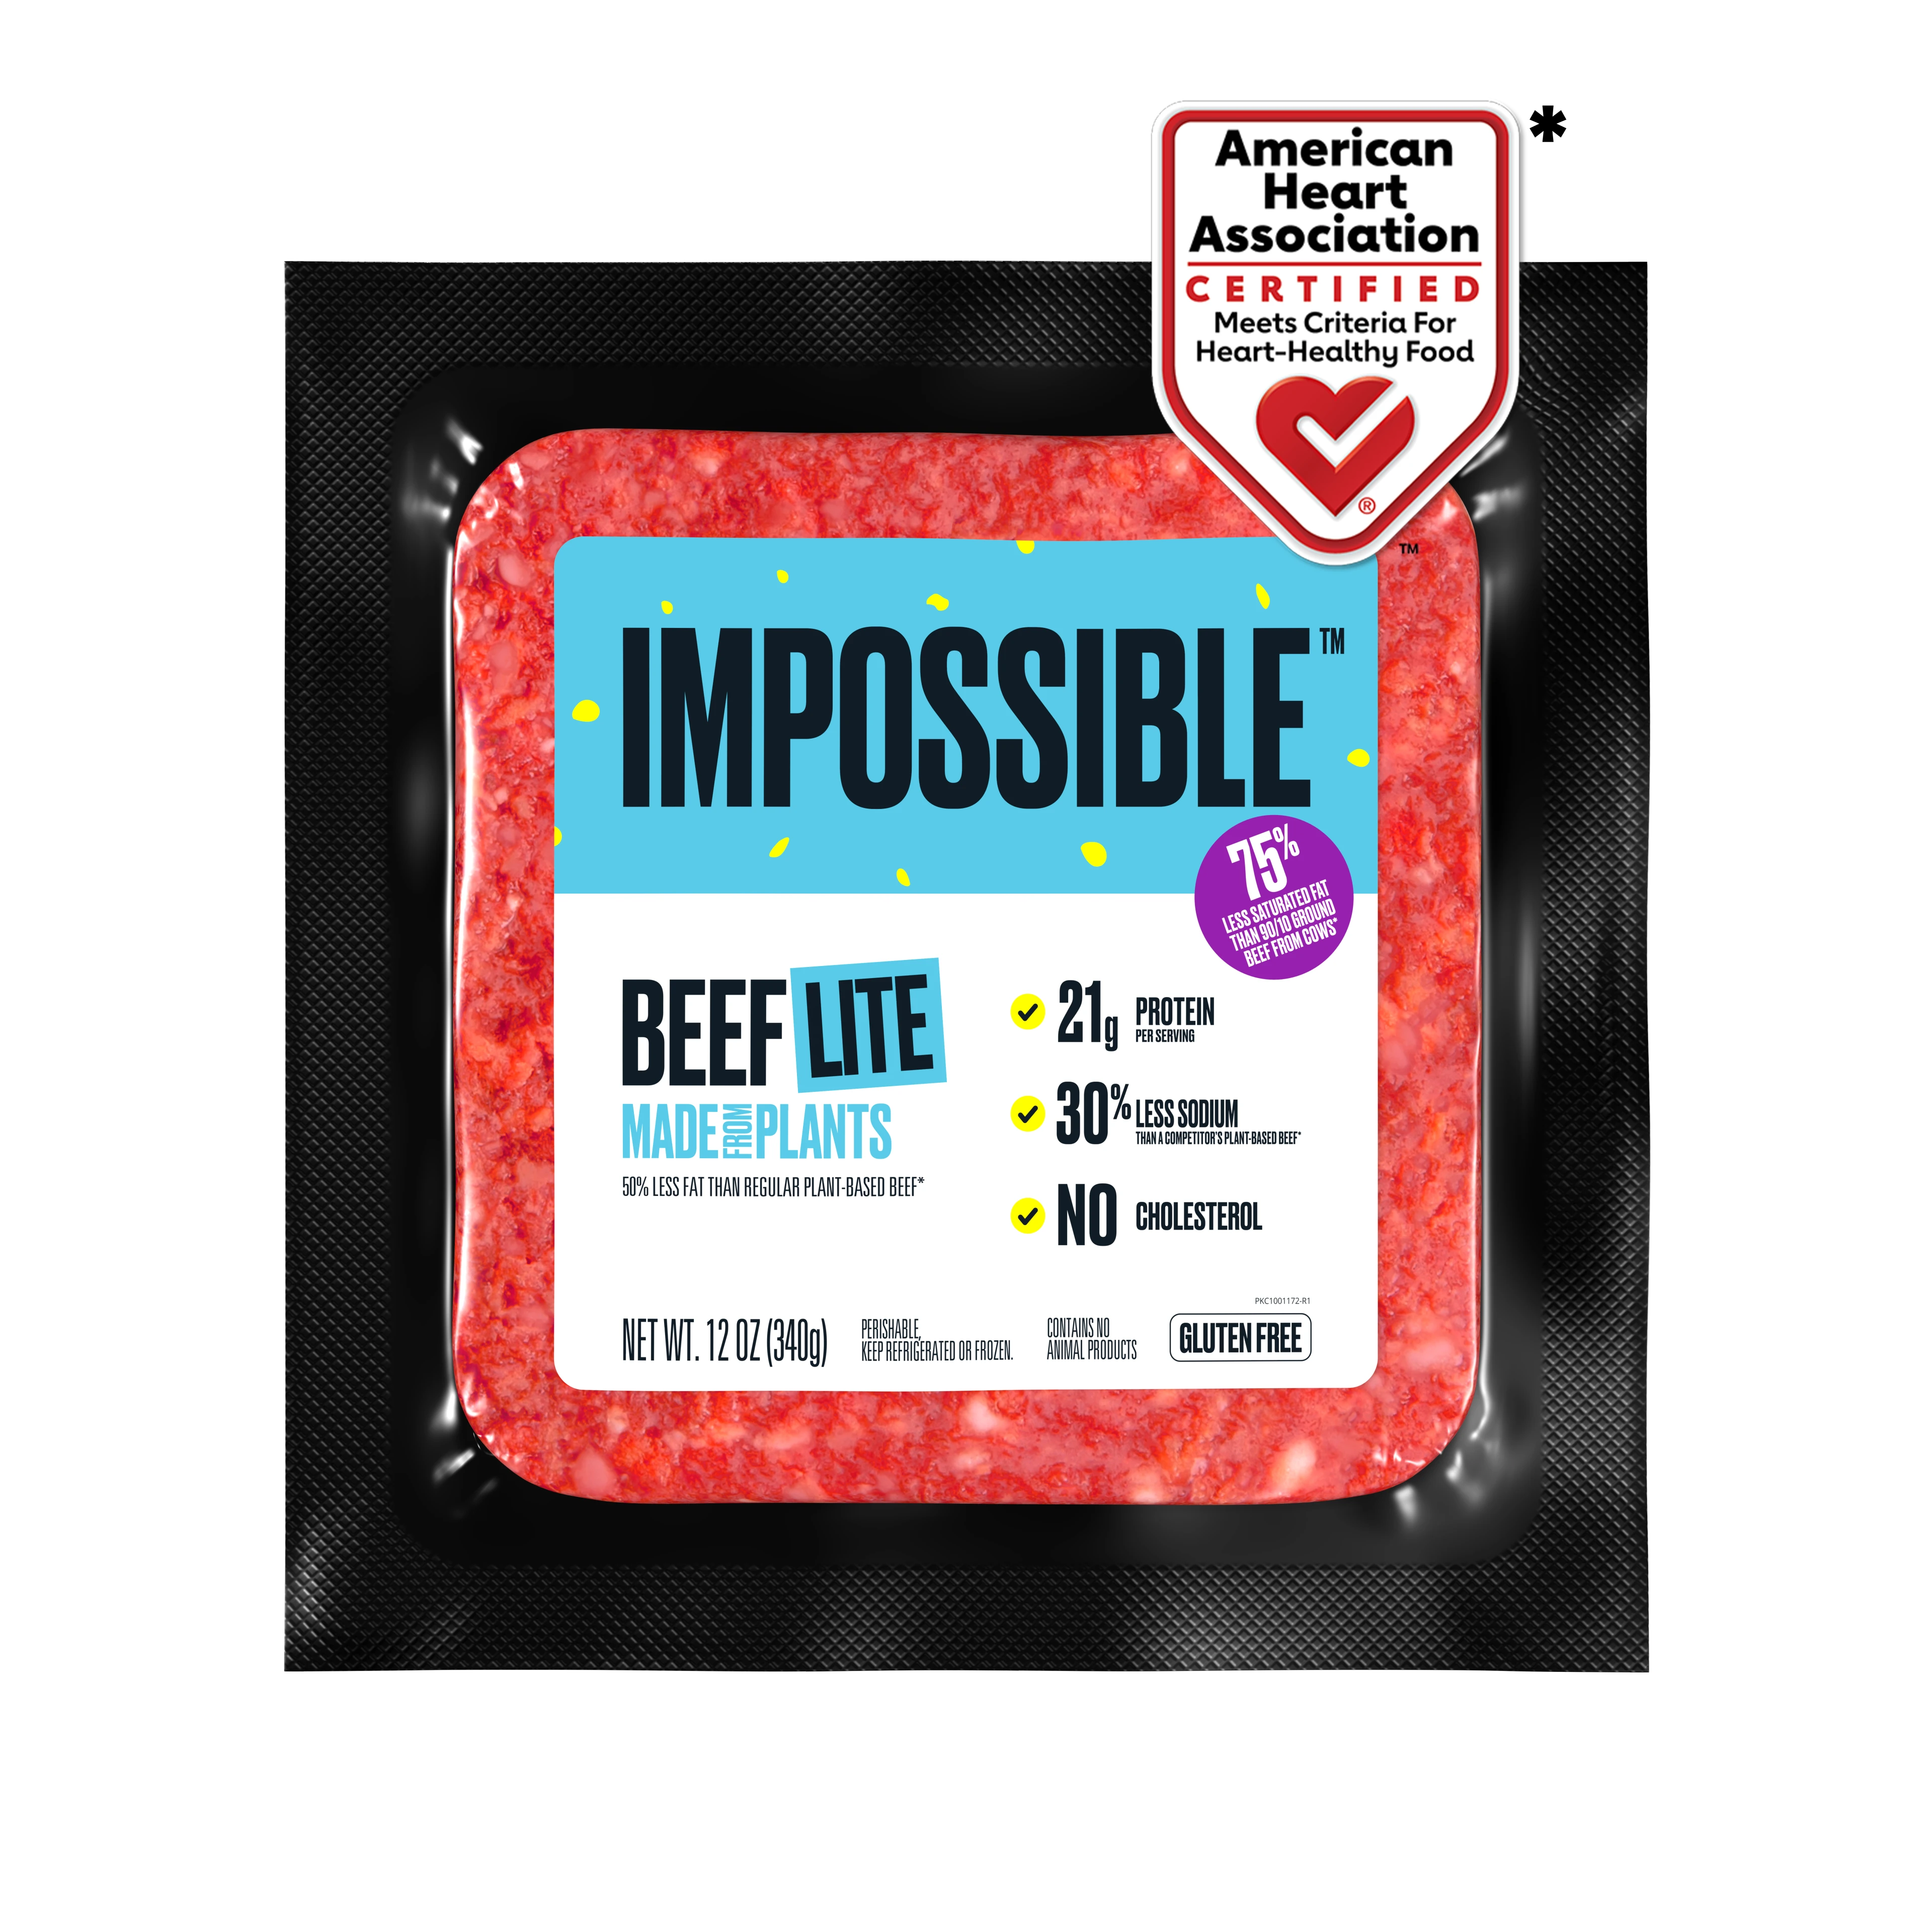 Grocery package of 16oz AHA certified Impossible Beef Lite made from plants